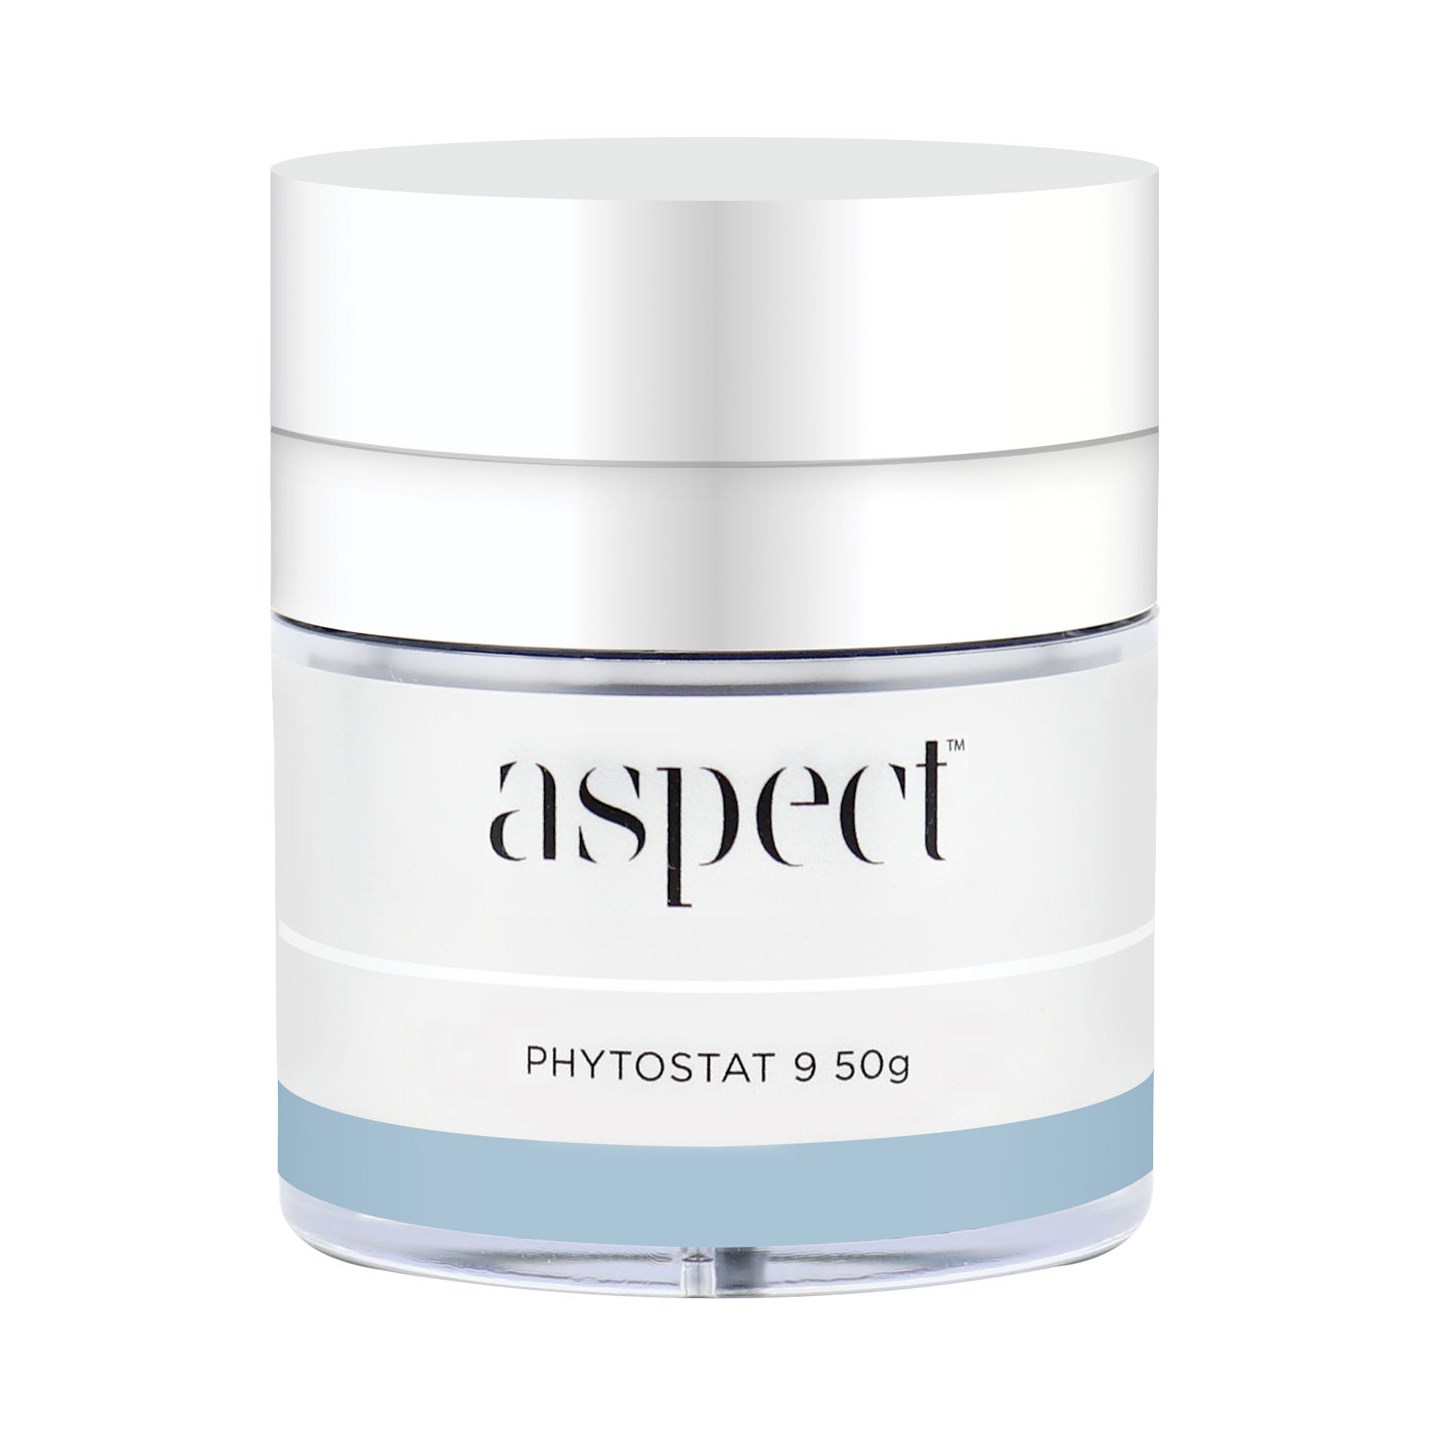 Aspect Phytostat 9 - with Airless Pump 50g